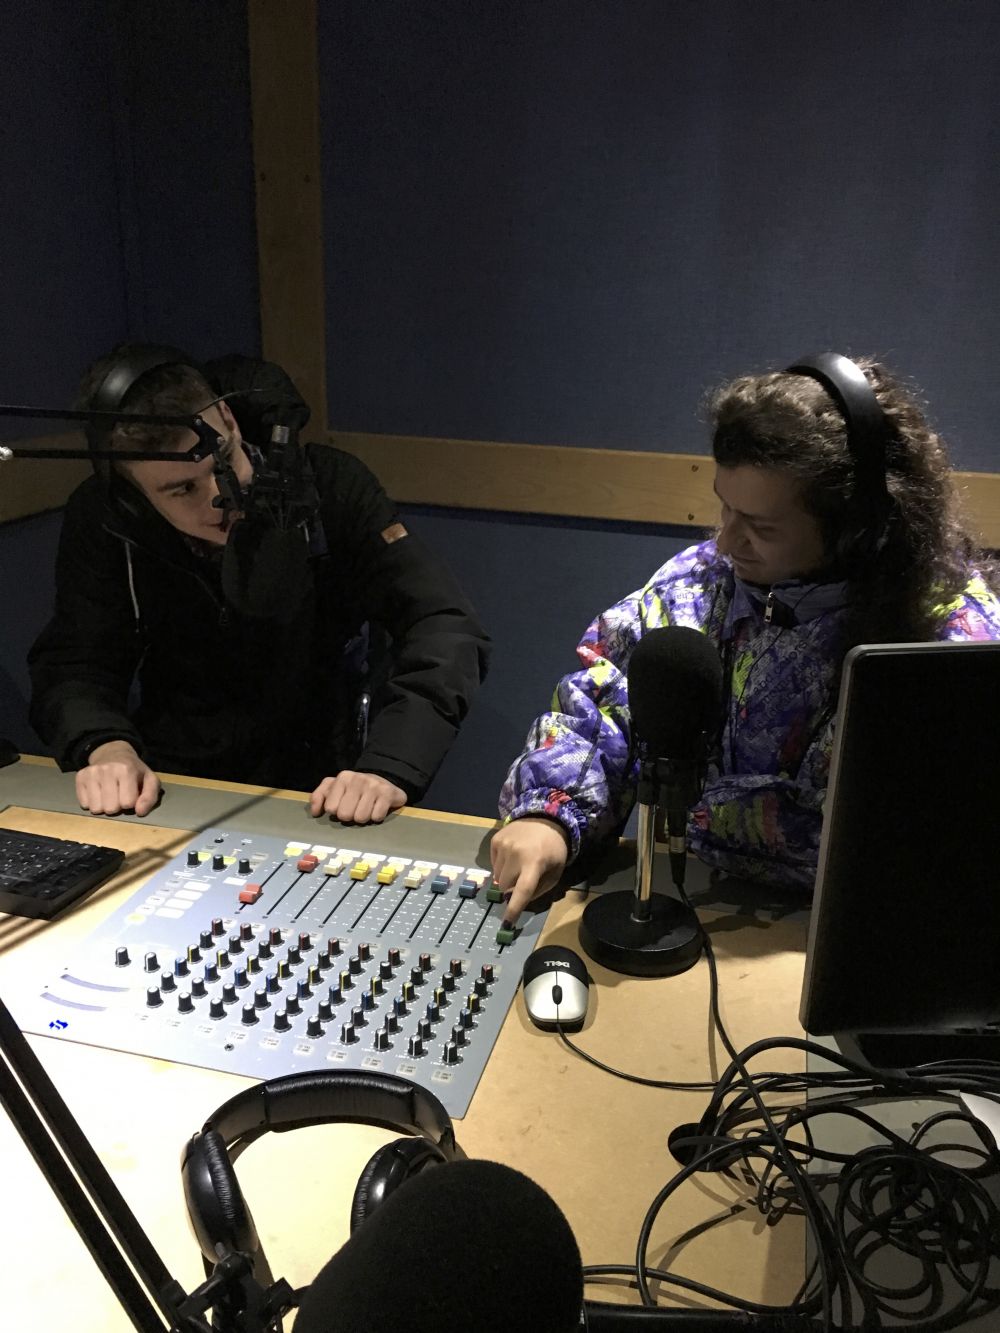 Studio time for Loughborough College students as they prepare for live radio 